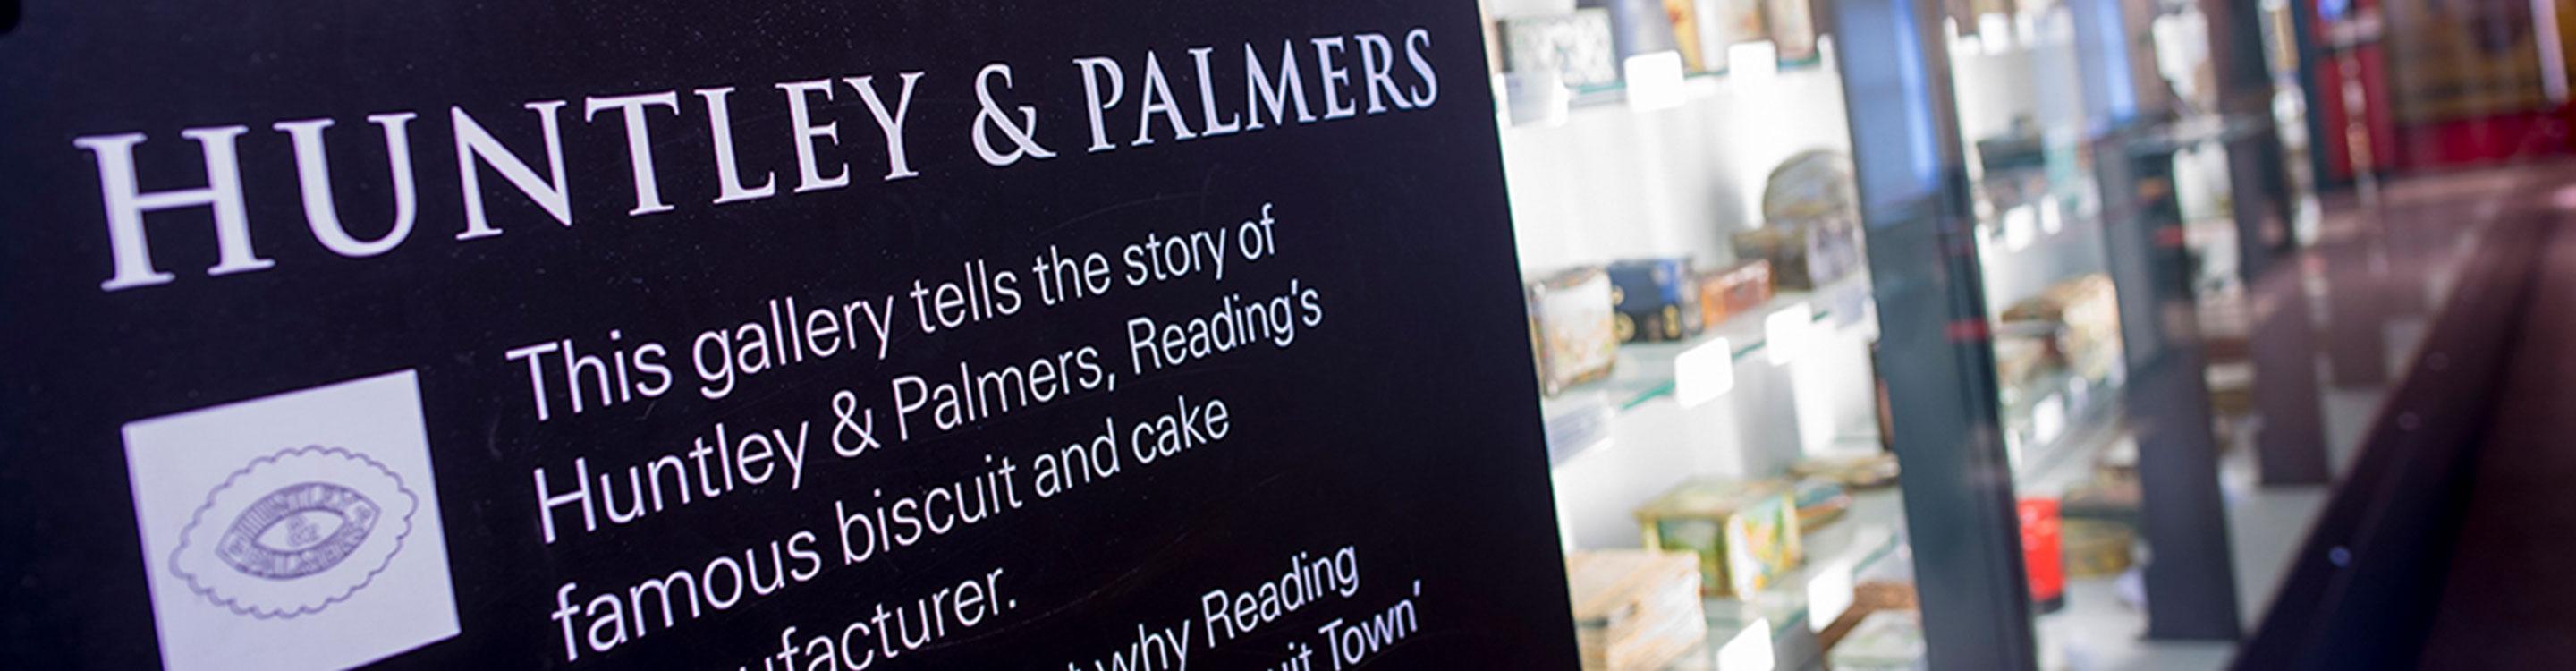 Huntley and Palmers gallery sign